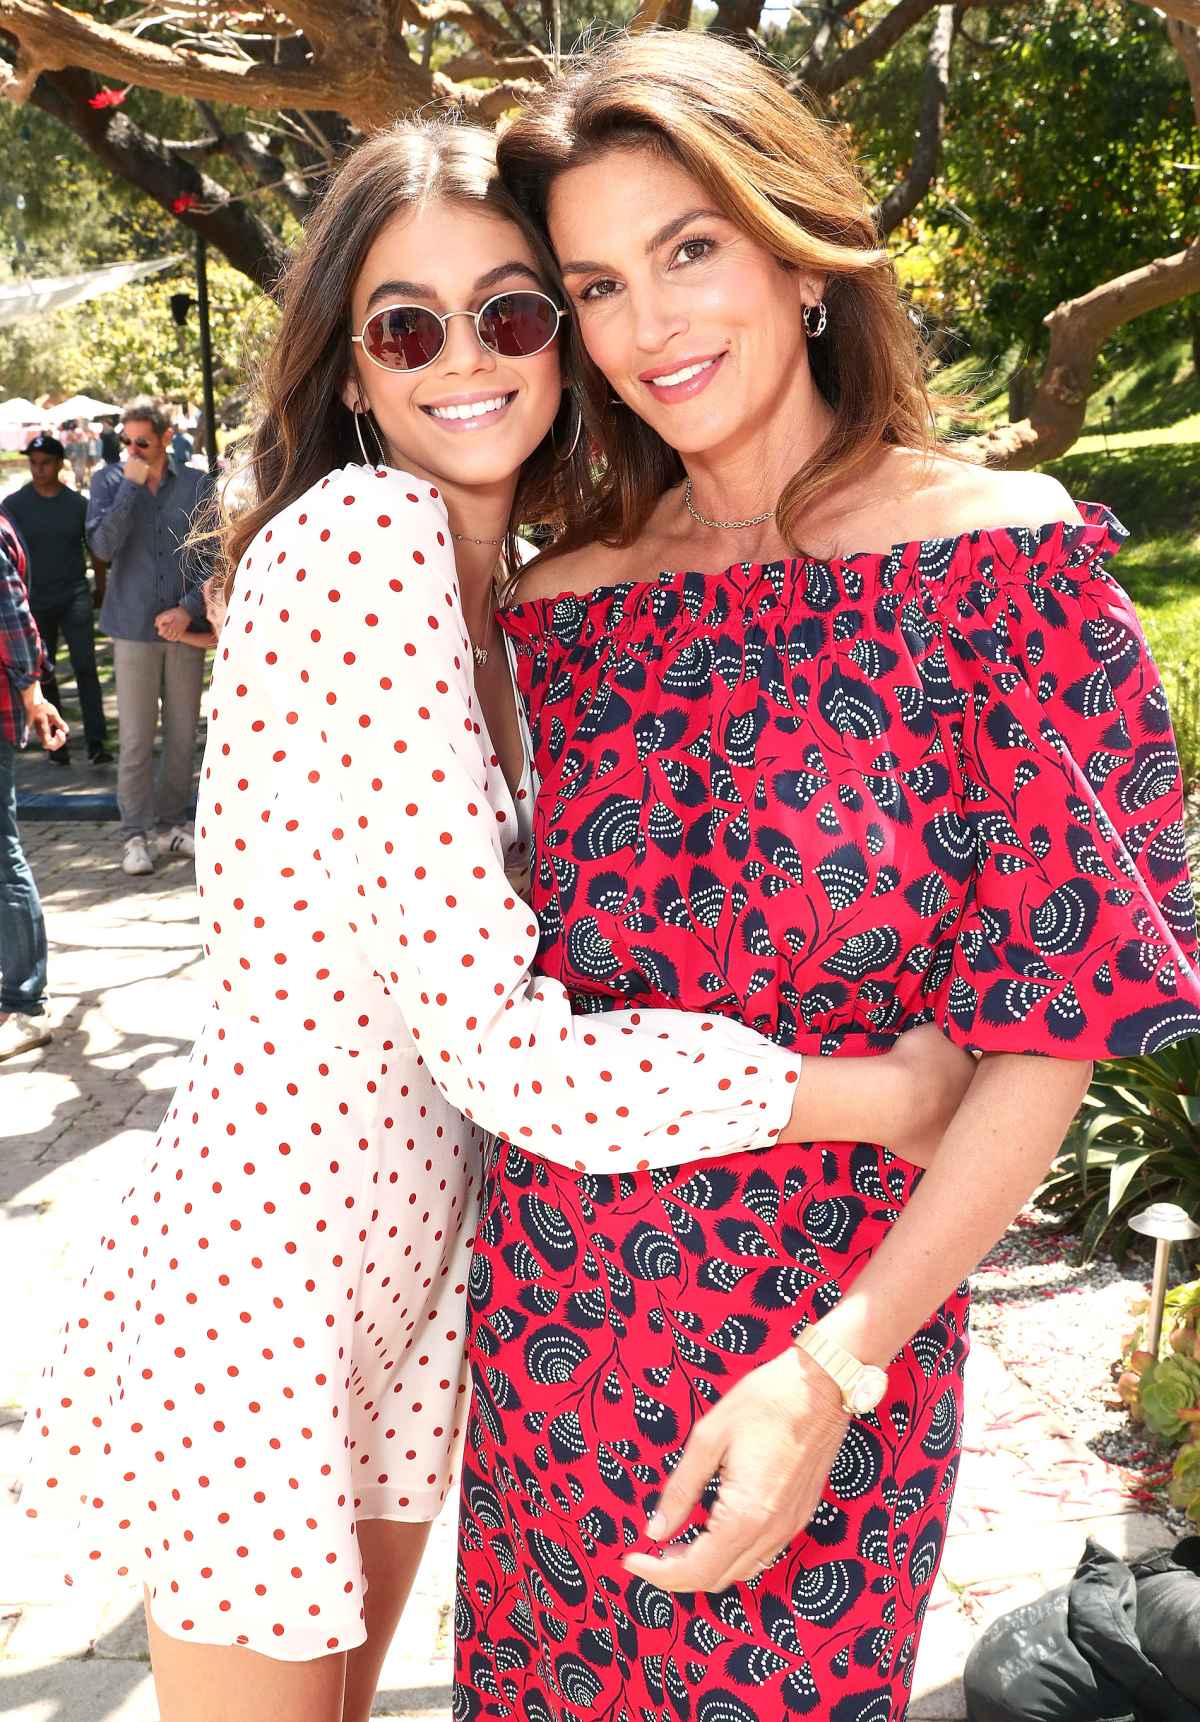 Kendall Jenner and Kaia Gerber Confirm Their Friendship in